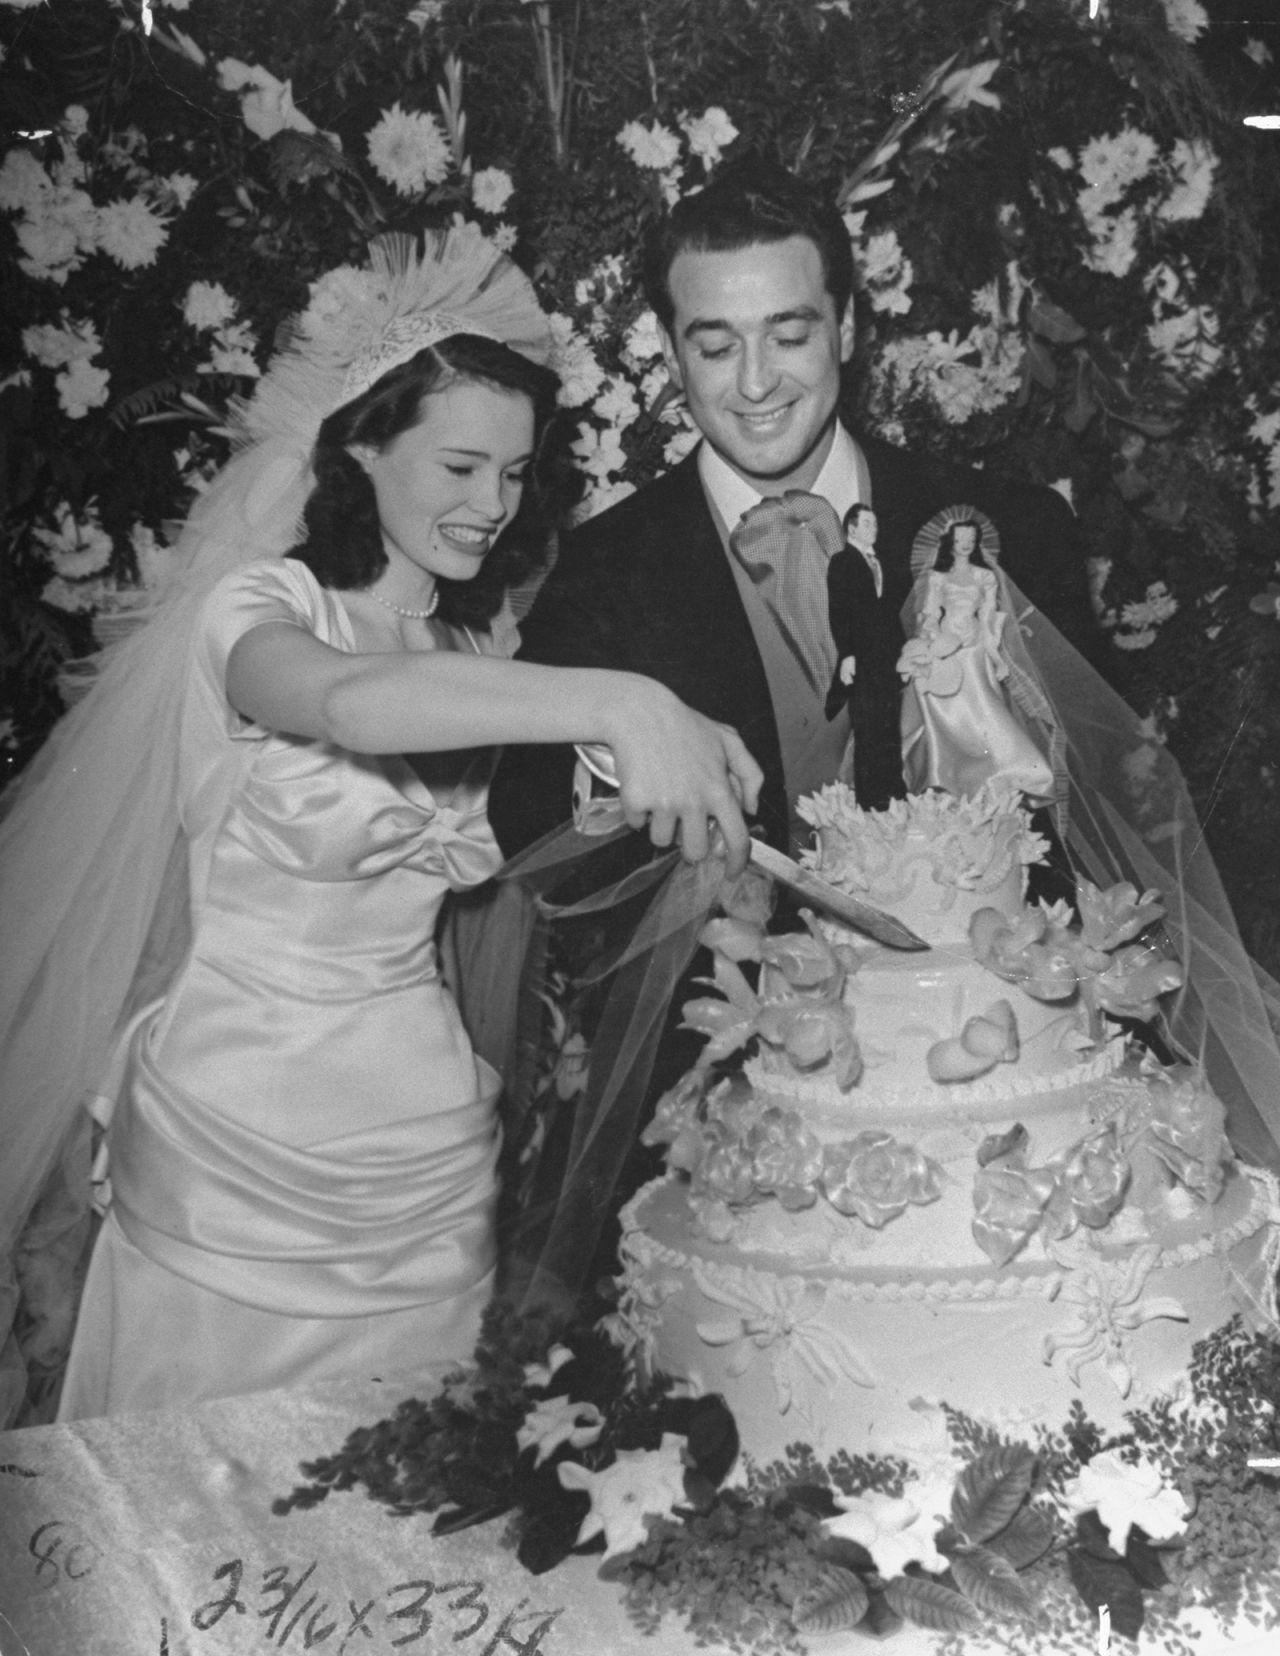 Vanderbilt and her first husband, Hollywood agent Pat DiCicco, cut their wedding cake in 1941. Vanderbilt was 17. At 21, she took control of a $4.3 million trust fund her father had left her. She divorced DiCicco two months later and promptly remarried — this time to conductor Leopold Stokowski, who was 63 at the time.